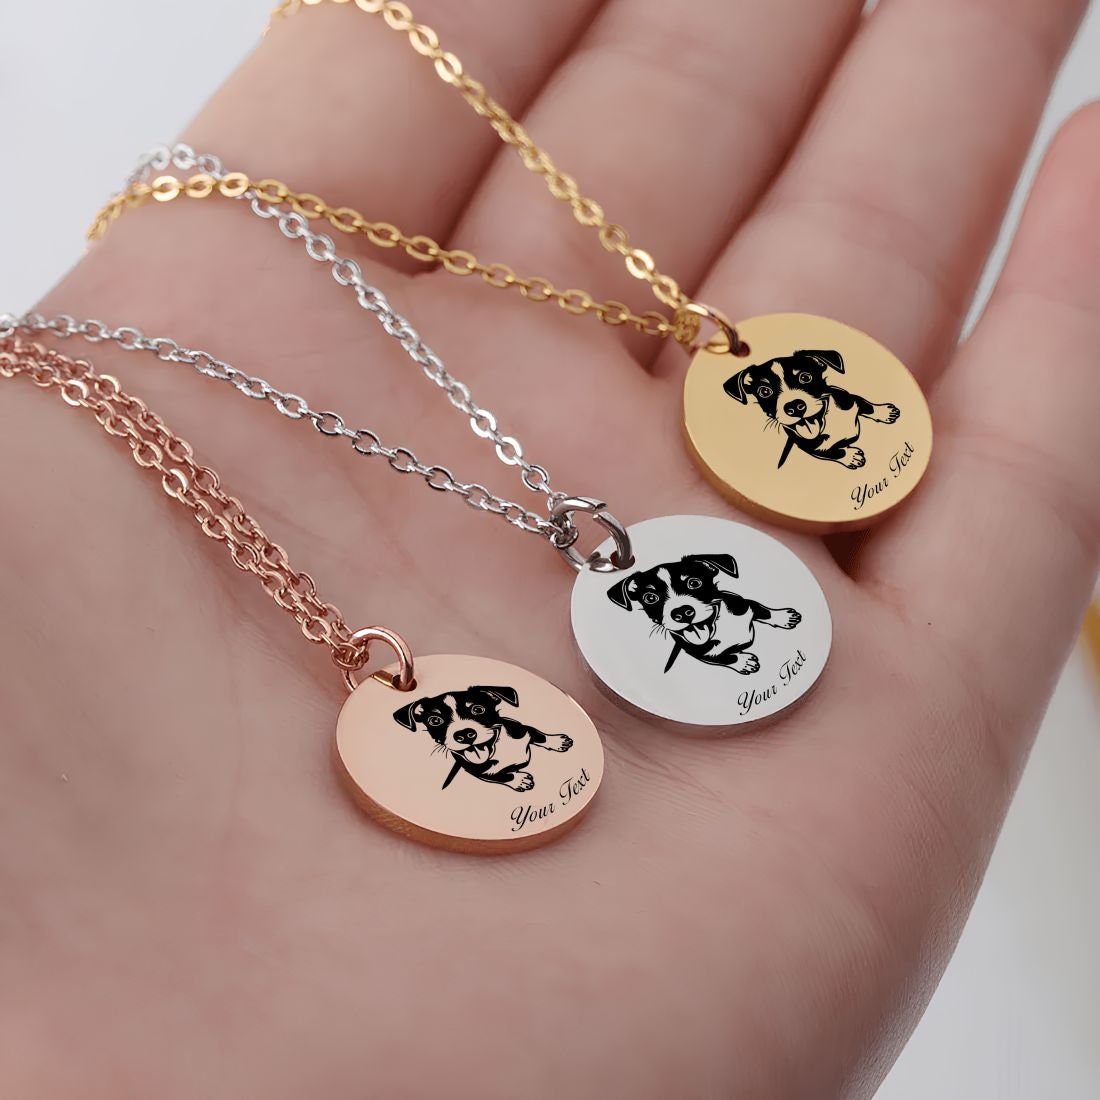 Jack Russell Dog Portrait Necklace - Personalizable Jewelry